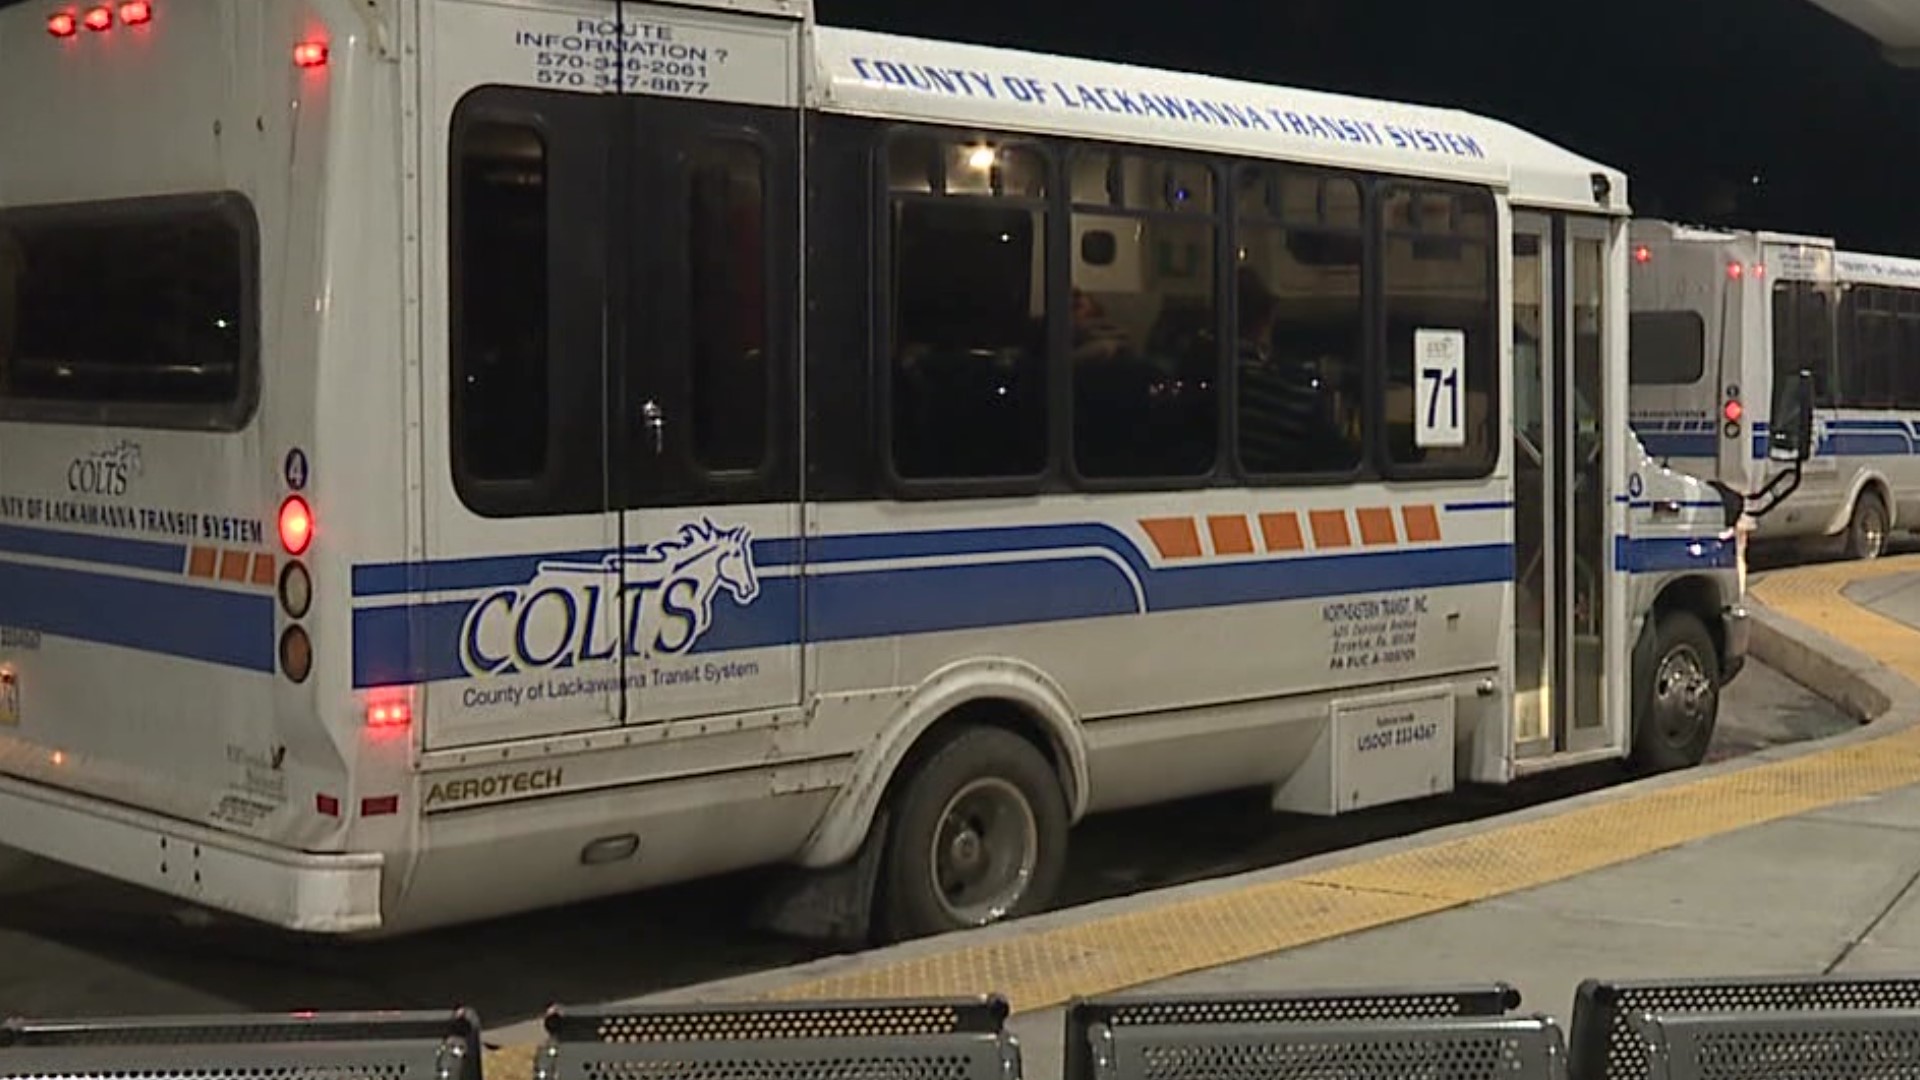 COLTS buses have been operating on Saturday schedules since early February because of staffing shortages and illness.